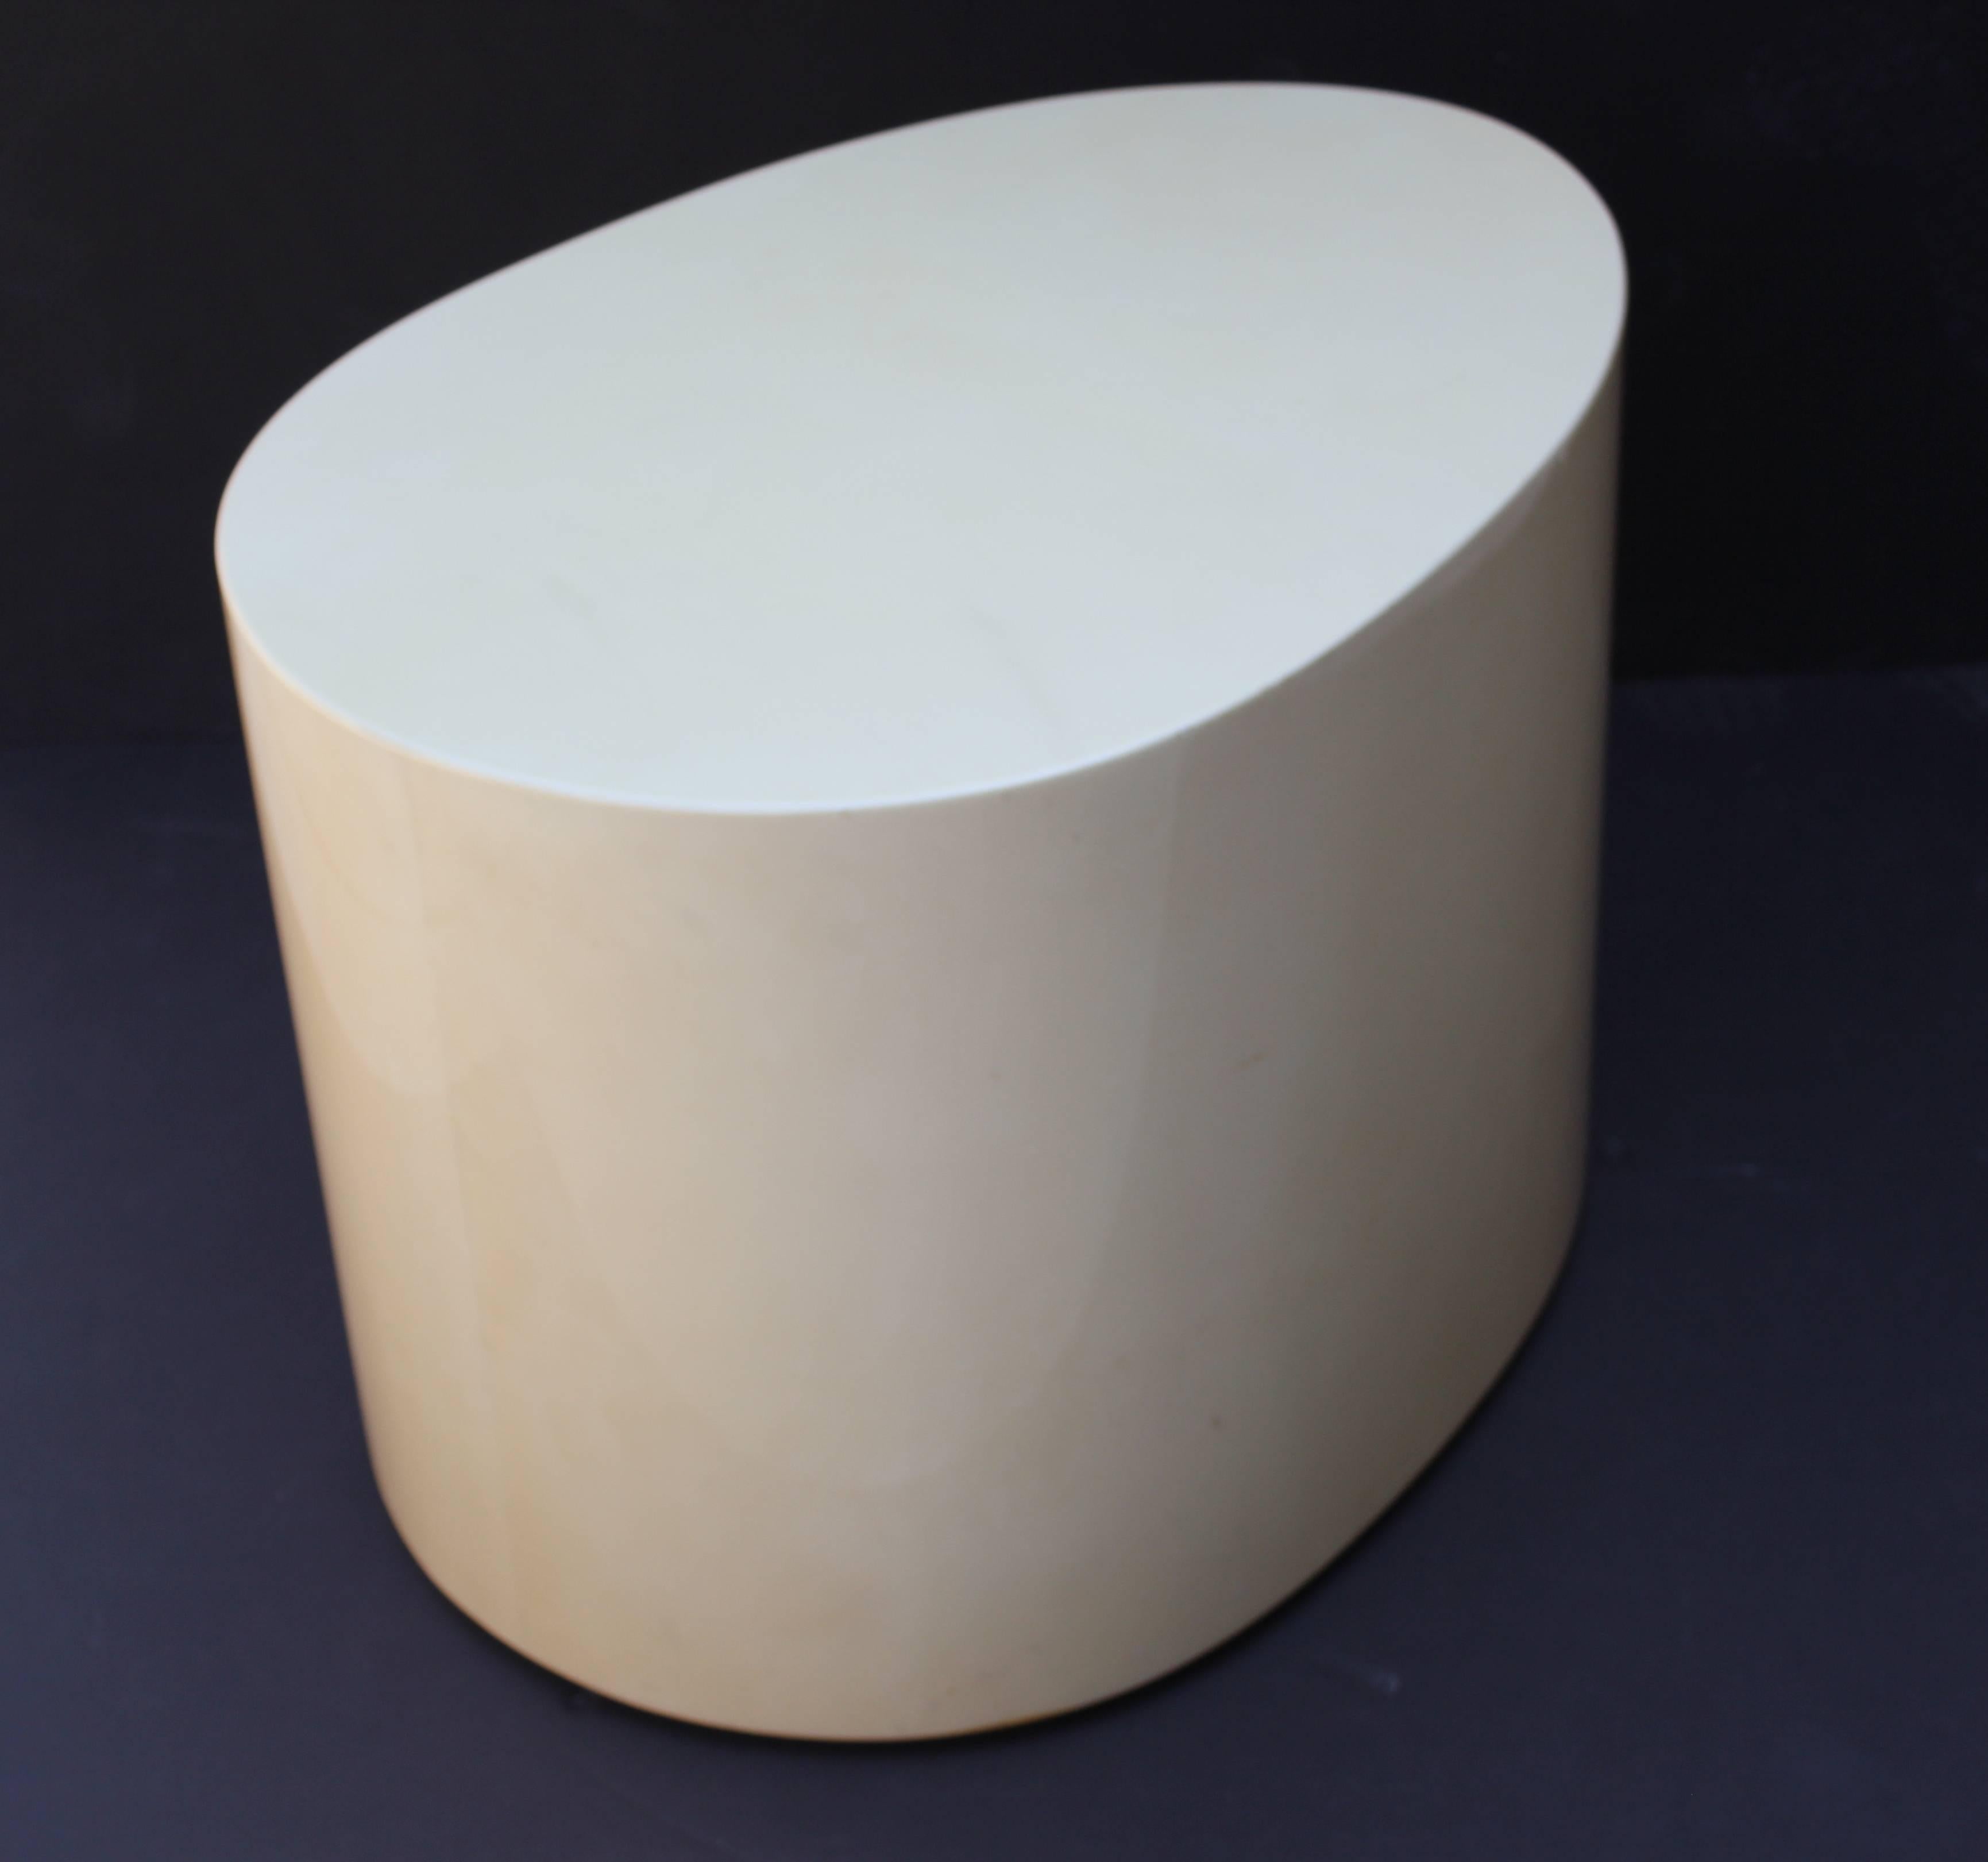 Italy, Aldo Tura egg shaped parchment side table, circa 1970s signed with manufacturers label.